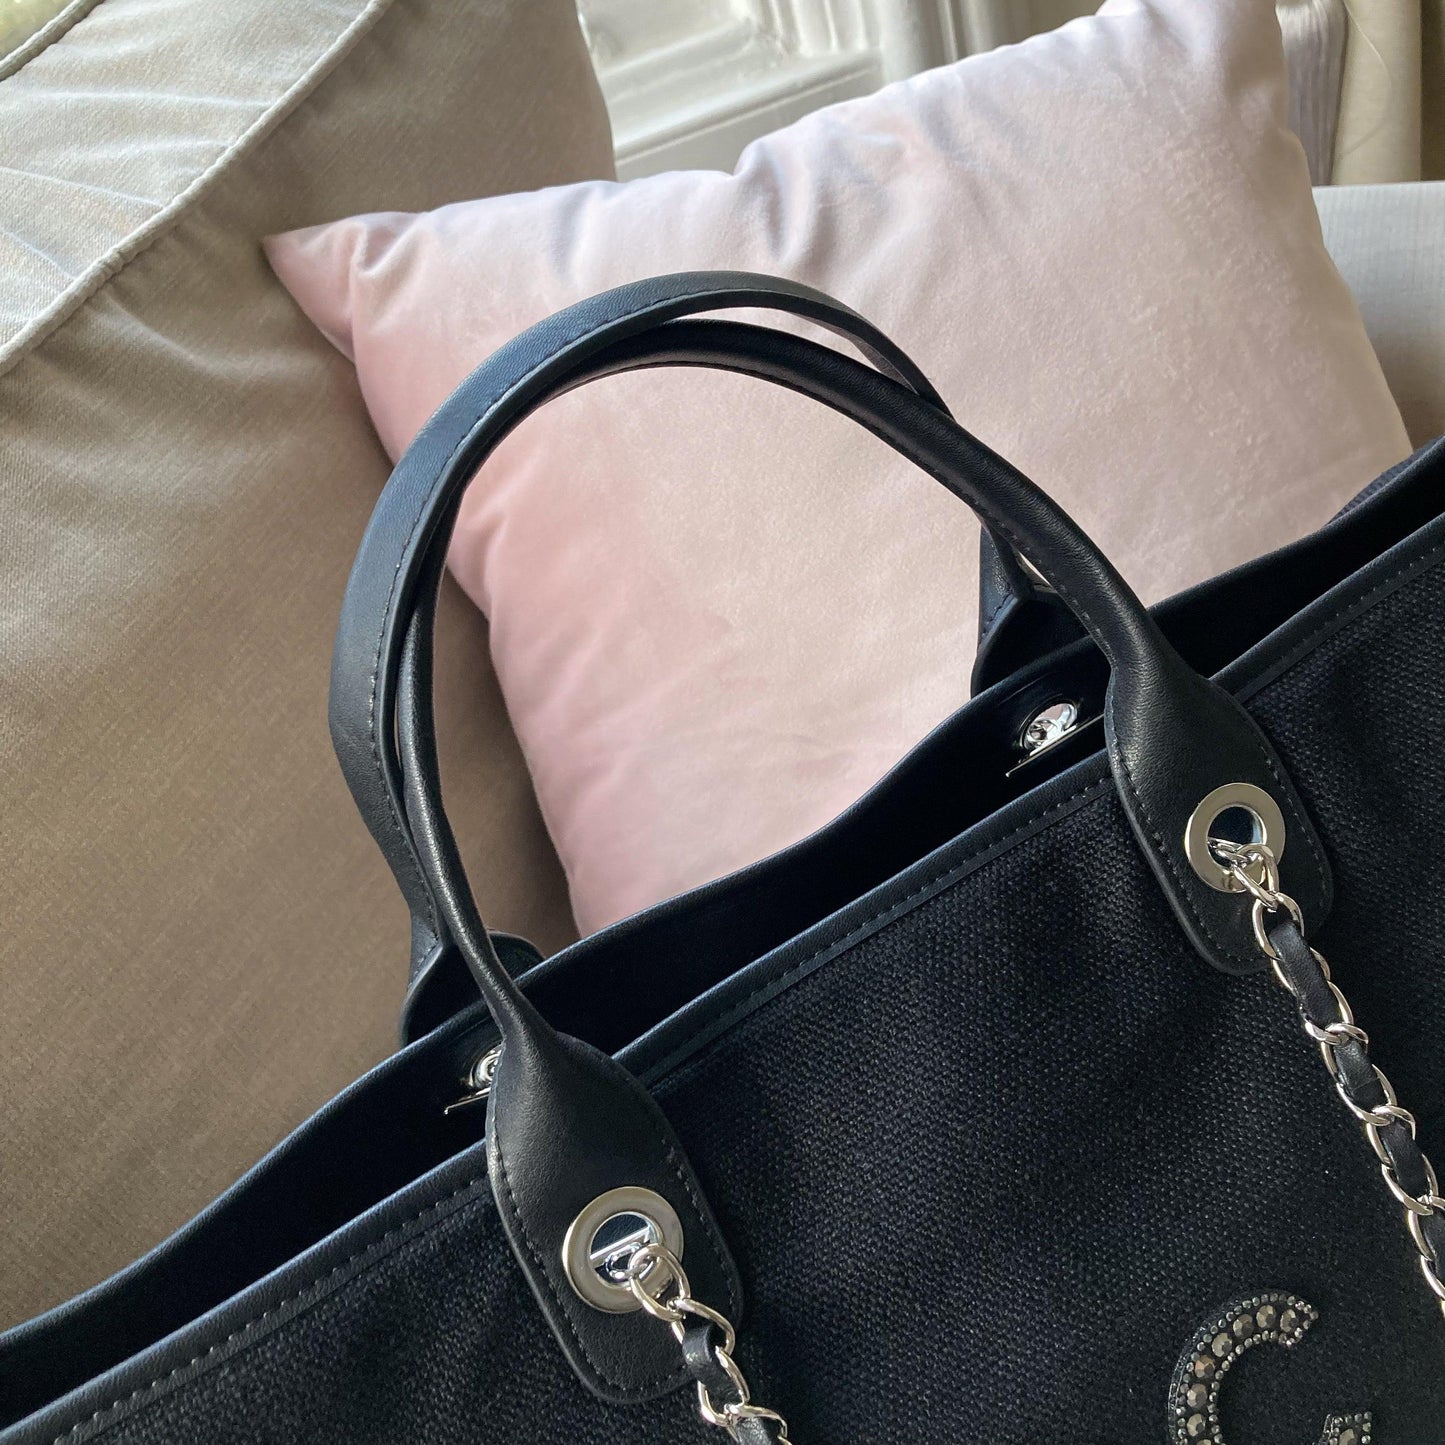 A close-up of the PU leather handles on the overnighter tote which provide a sturdy carrying option